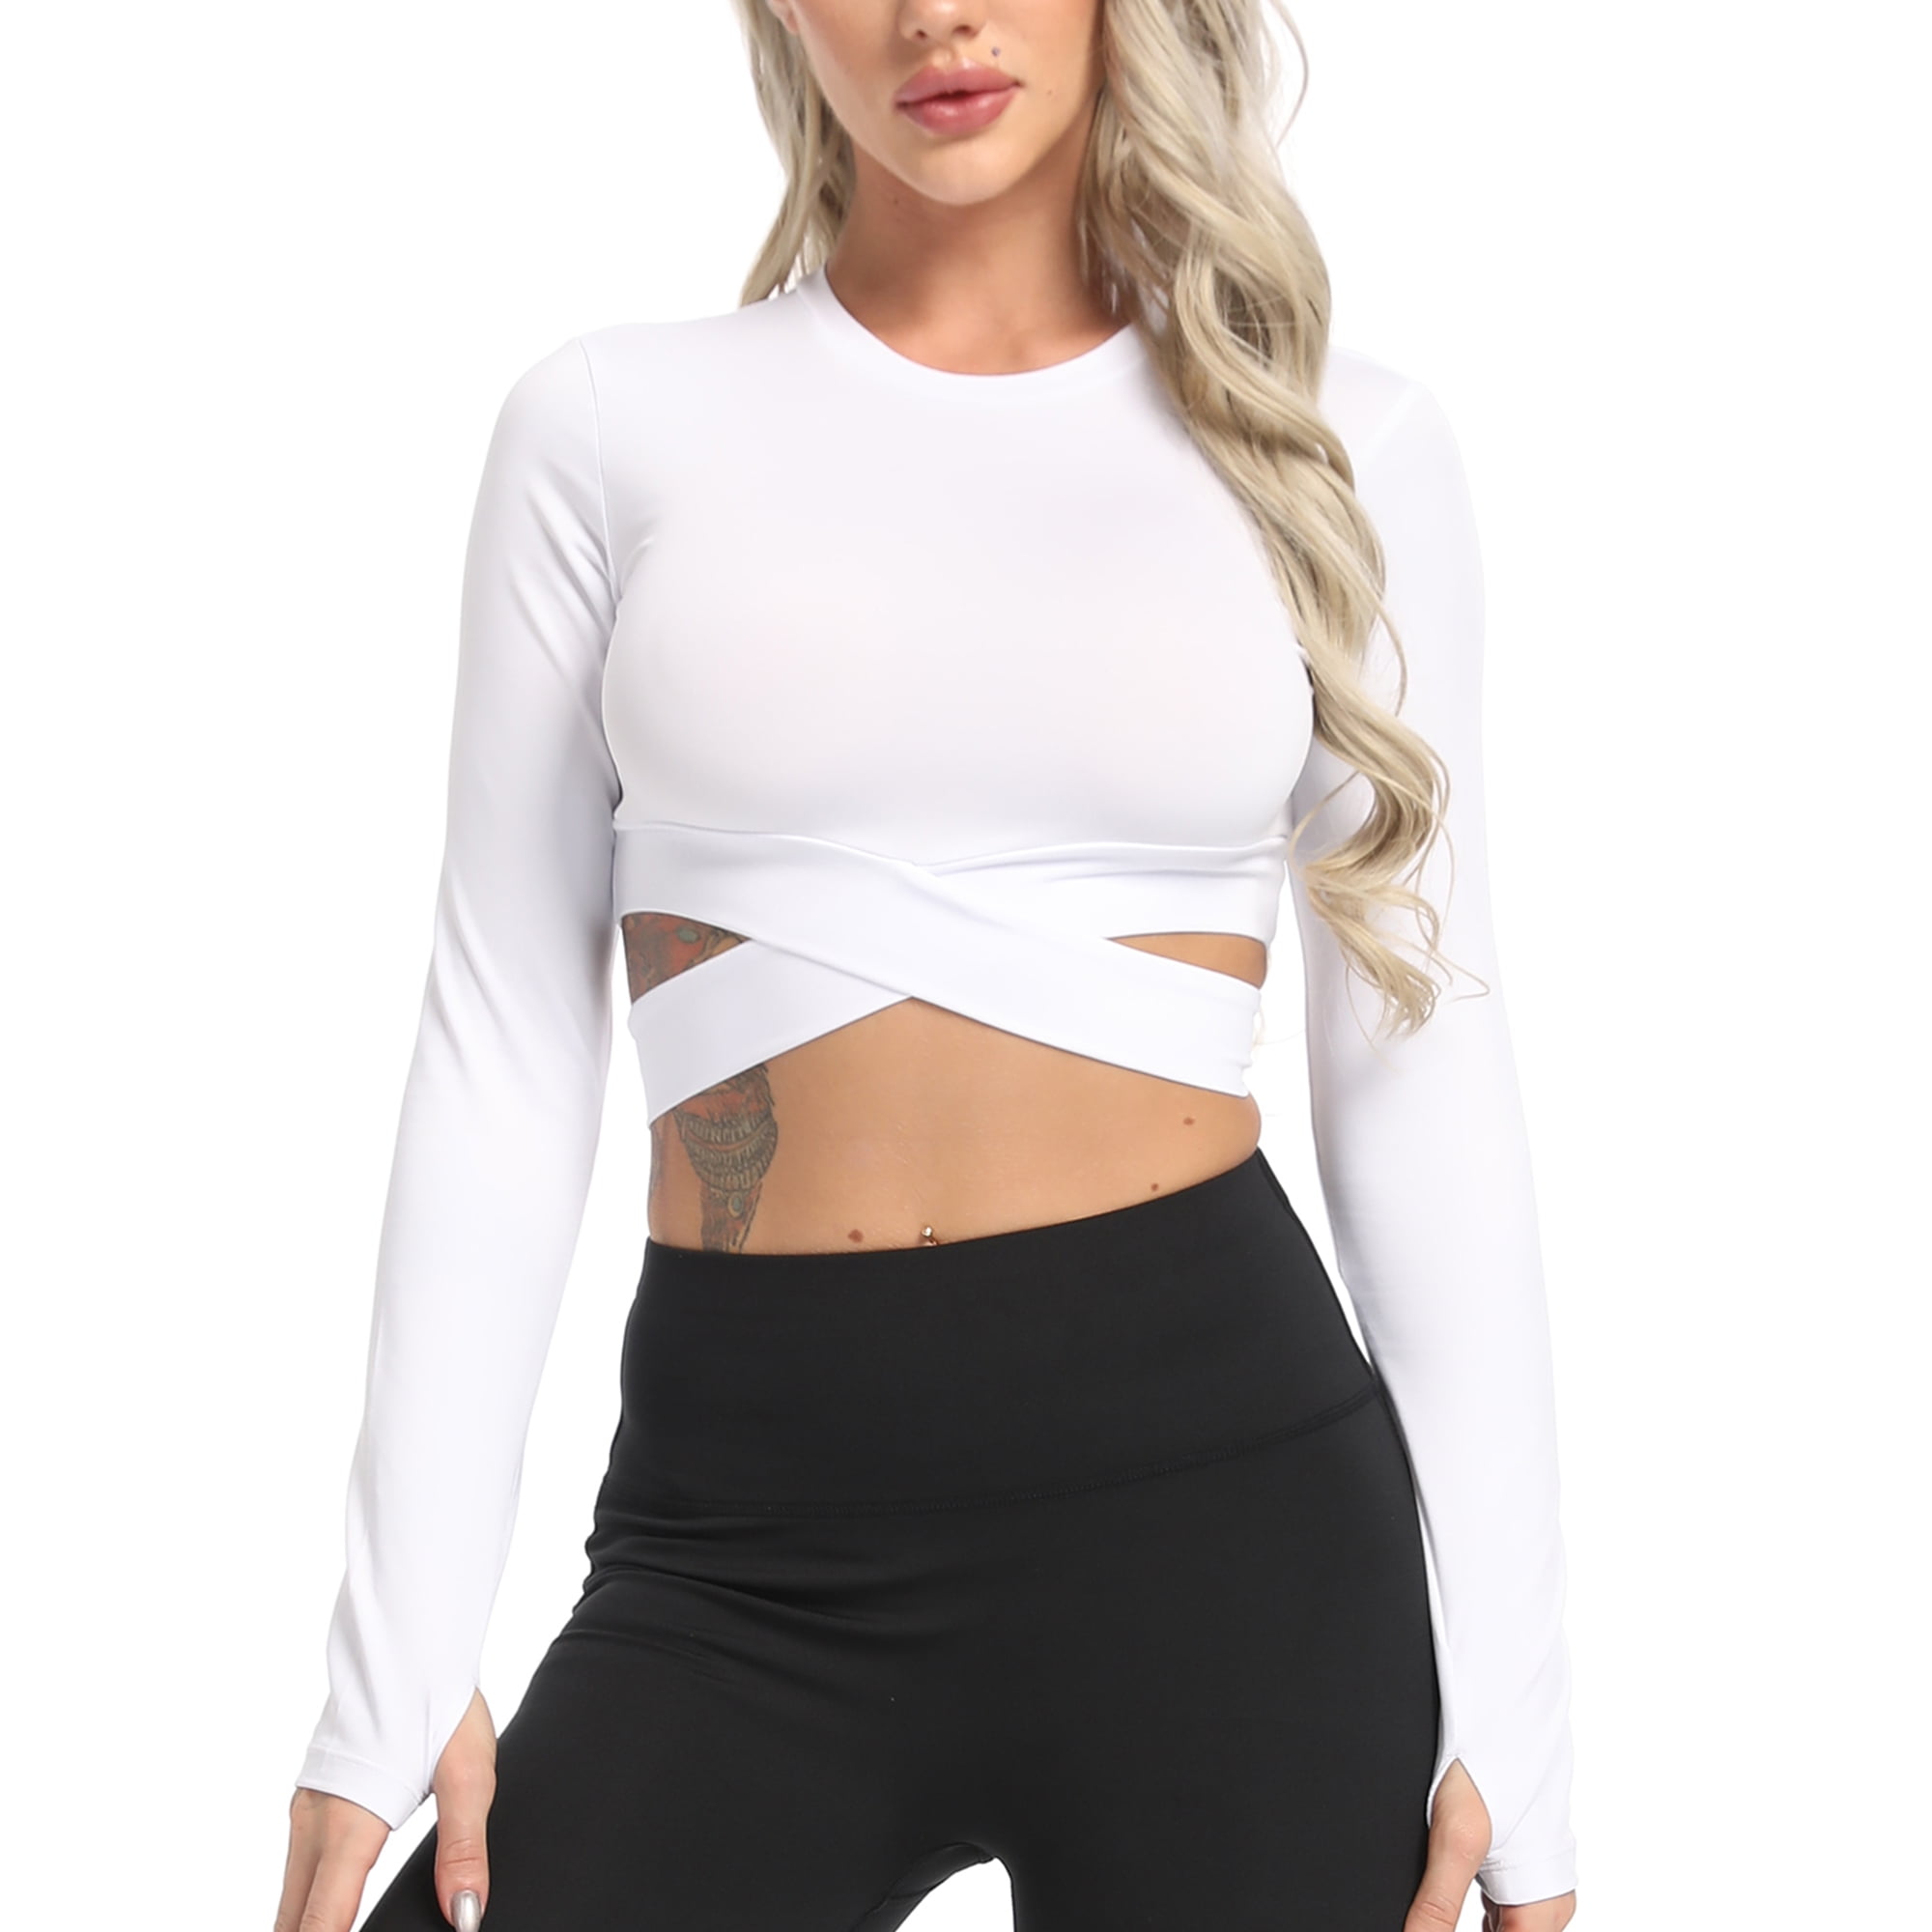 Authentic Guaranteed FITTOO W’s Crop Tops Long S Ar Wt Yoga Gym Top L T ...